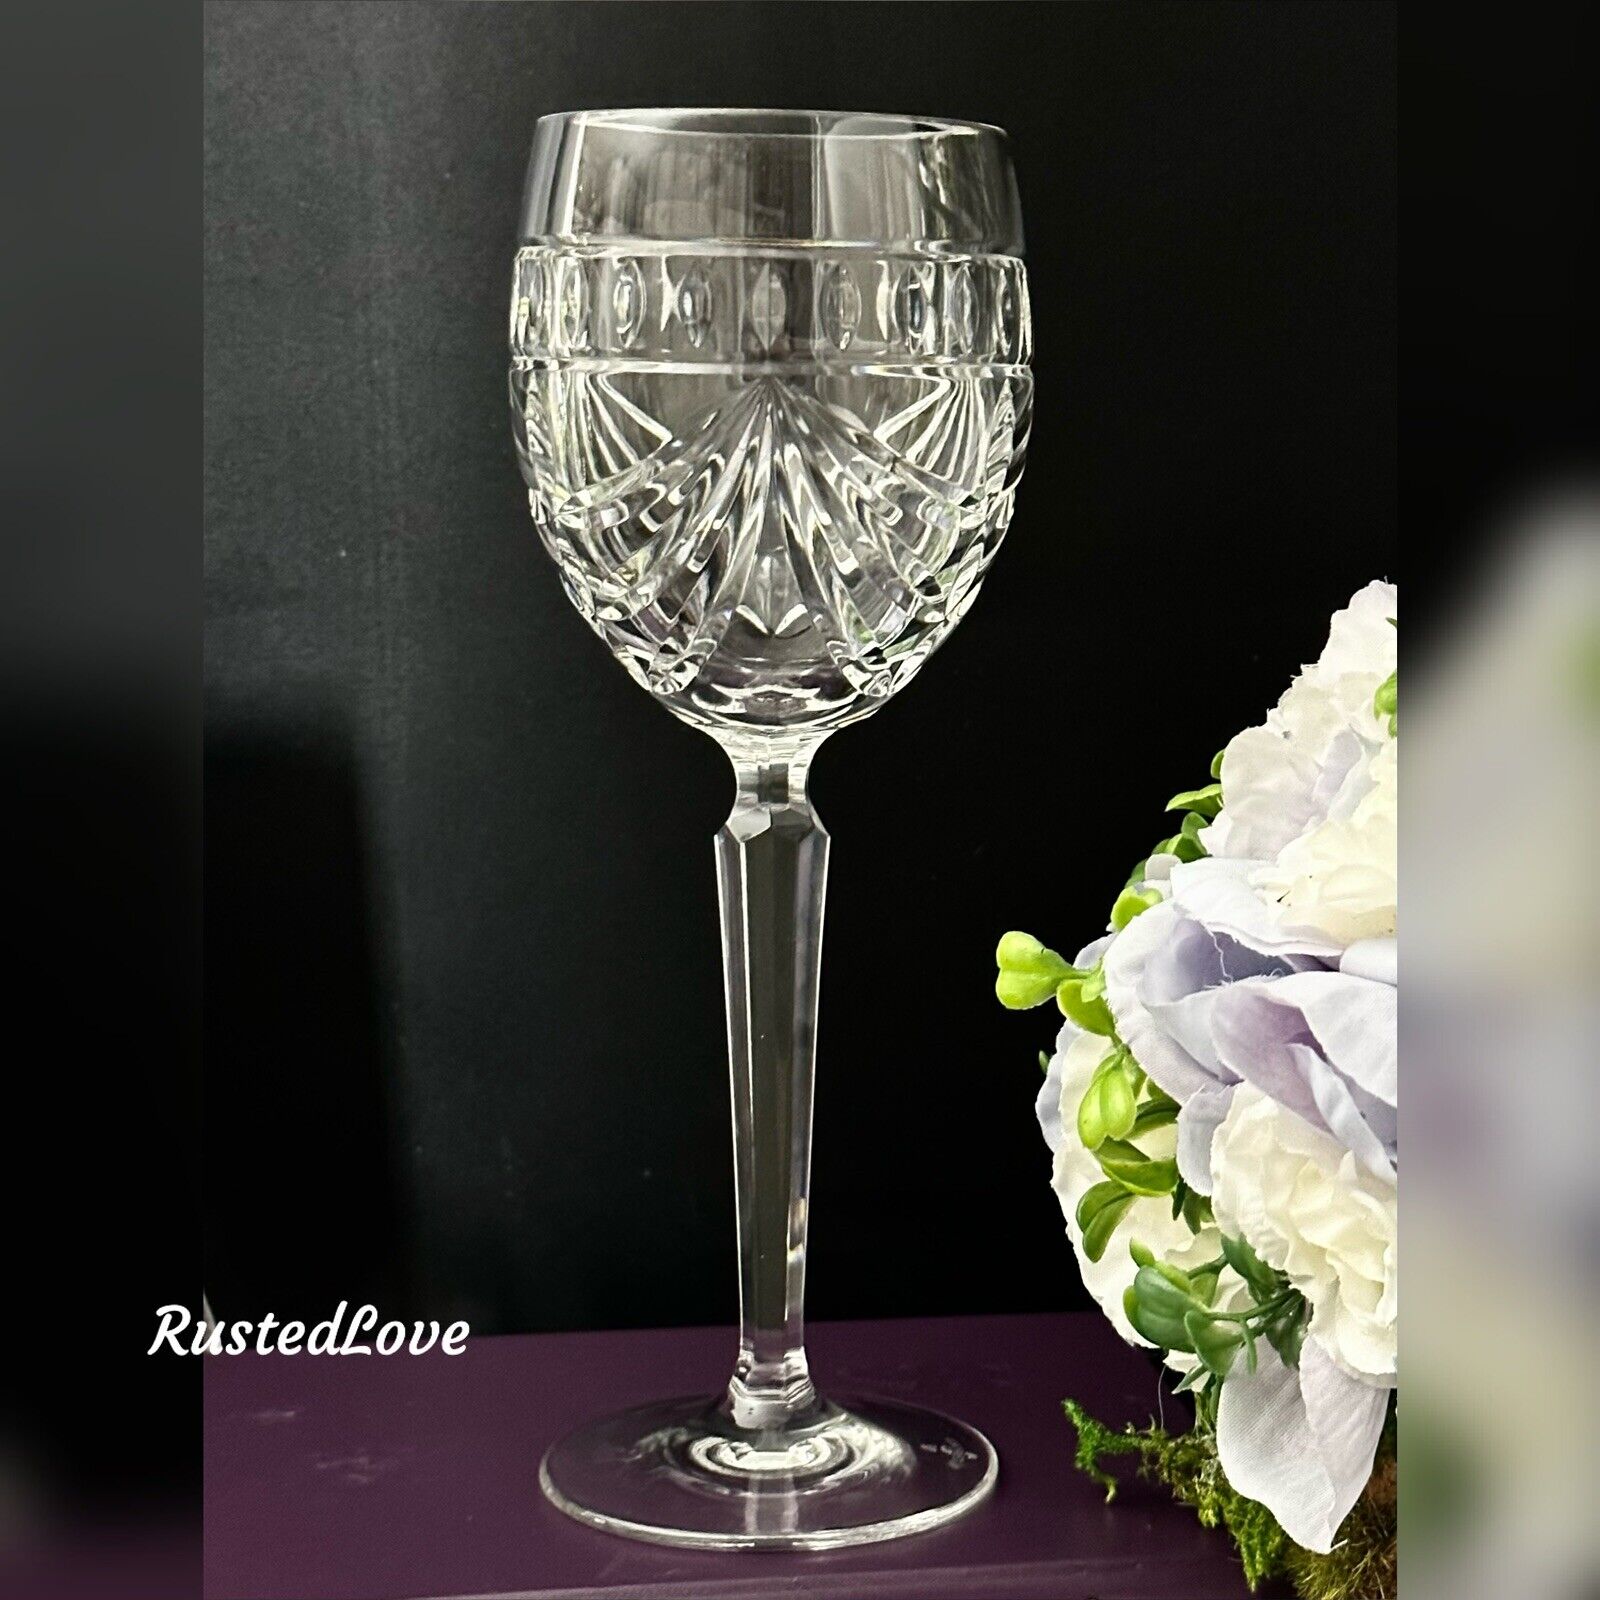 Waterford Crystal Overture Wine Glass Vintage Clear Cut Decor Blown Glass - 1 *